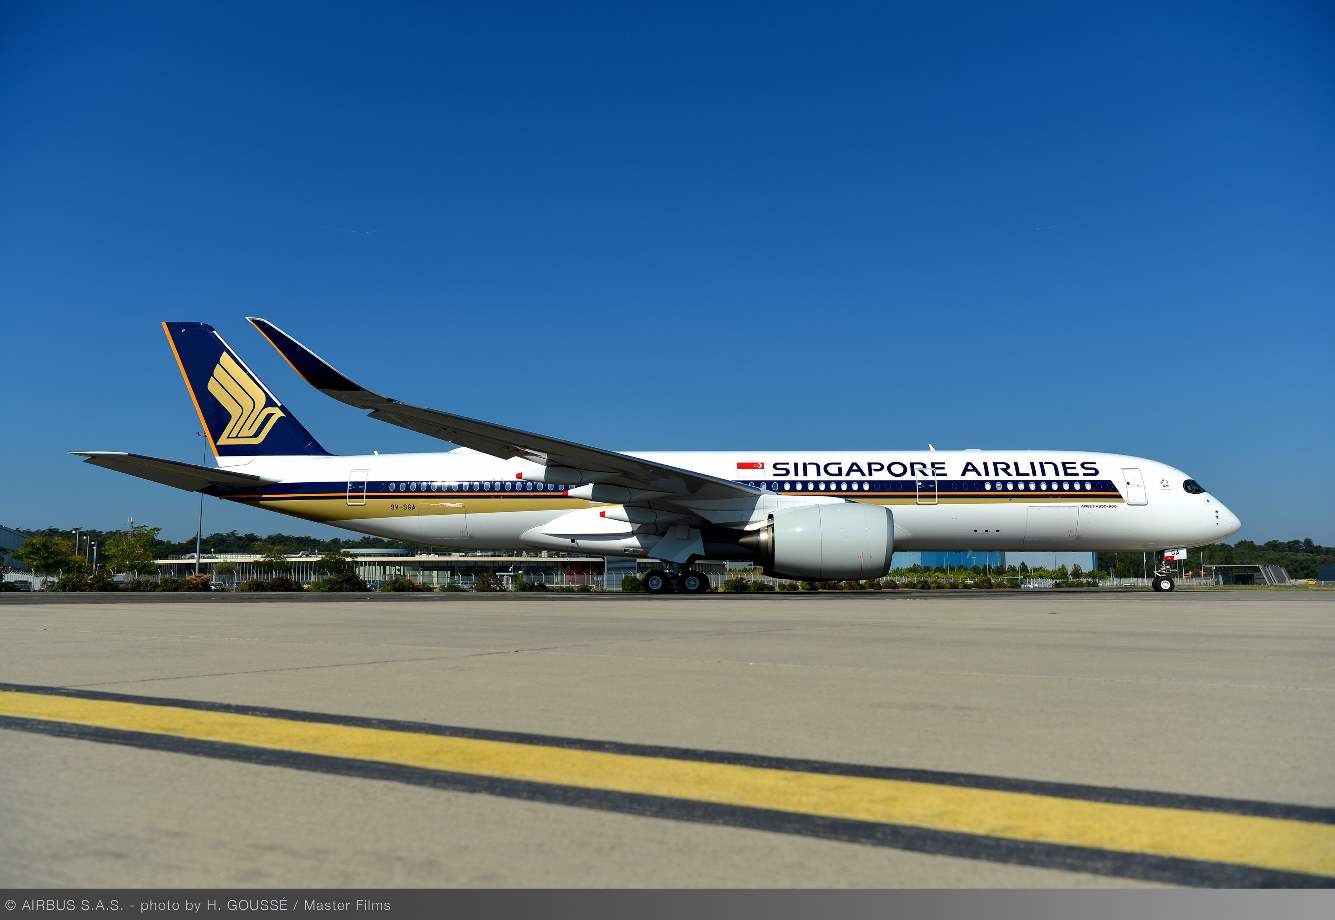 Singapore Airlines gets first Ultra Long Range Airbus A350 XWB